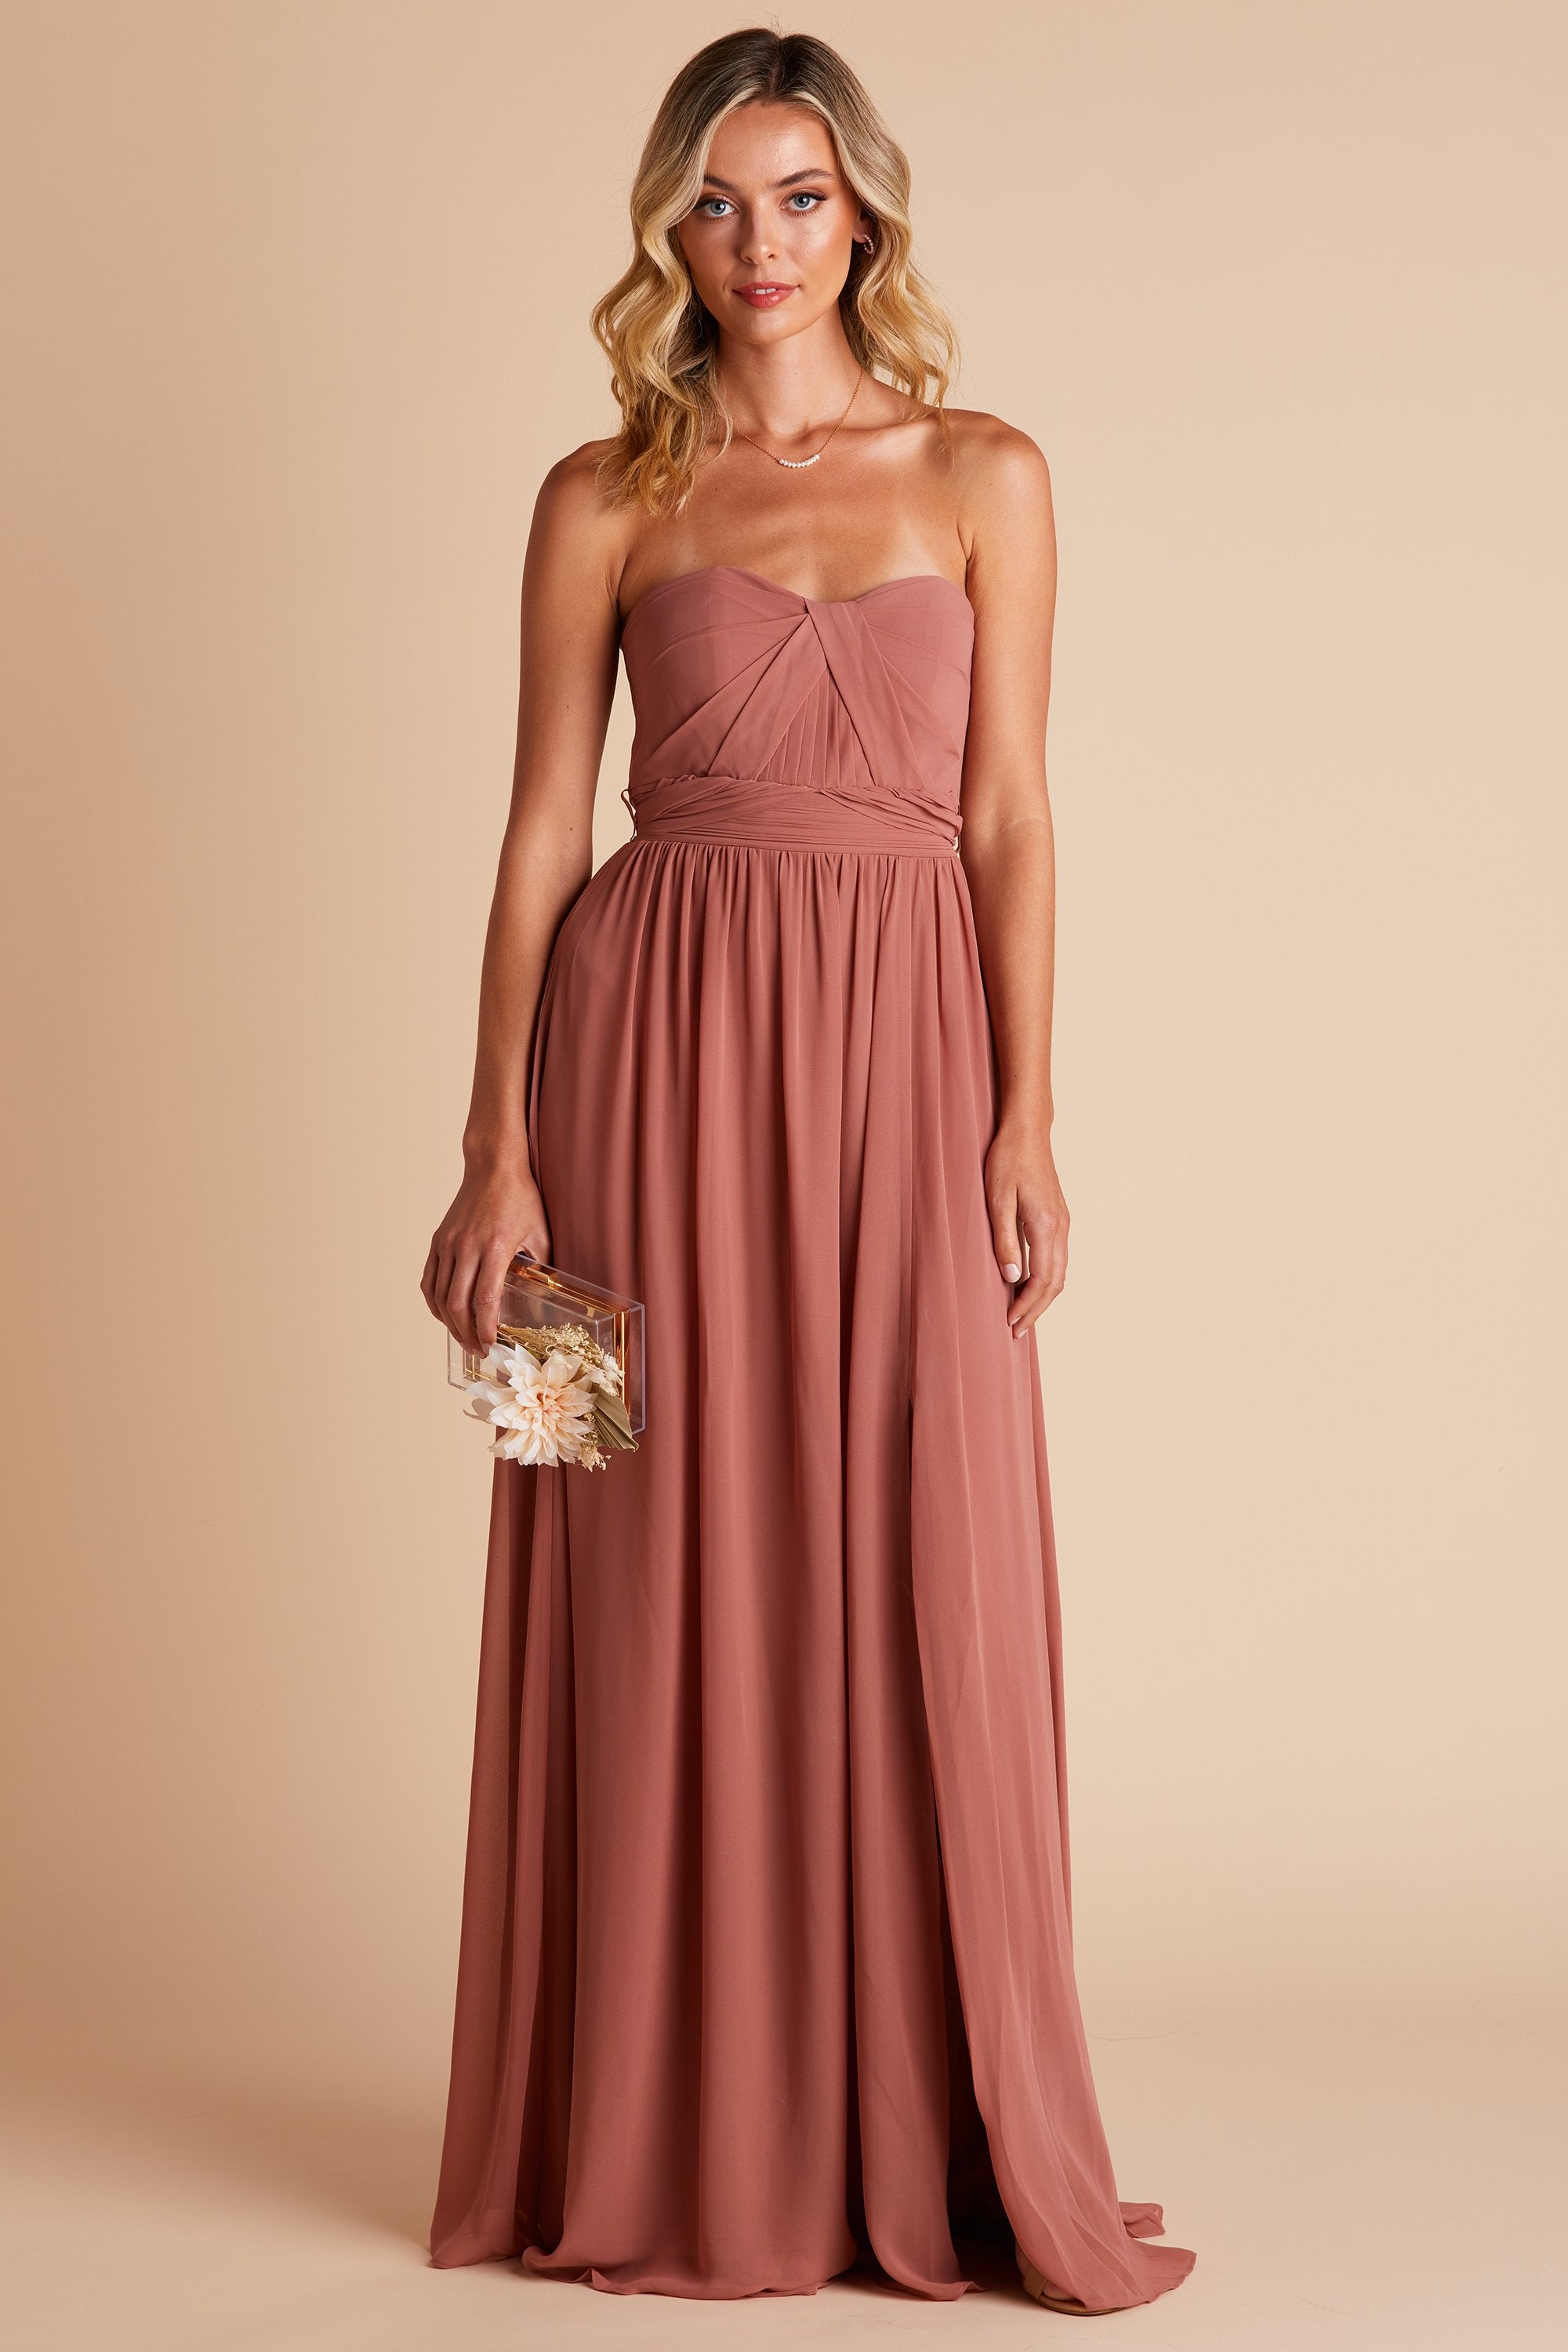 Front view of the Grace Convertible Dress in desert rose chiffon worn by a slender model with a light skin tone. 